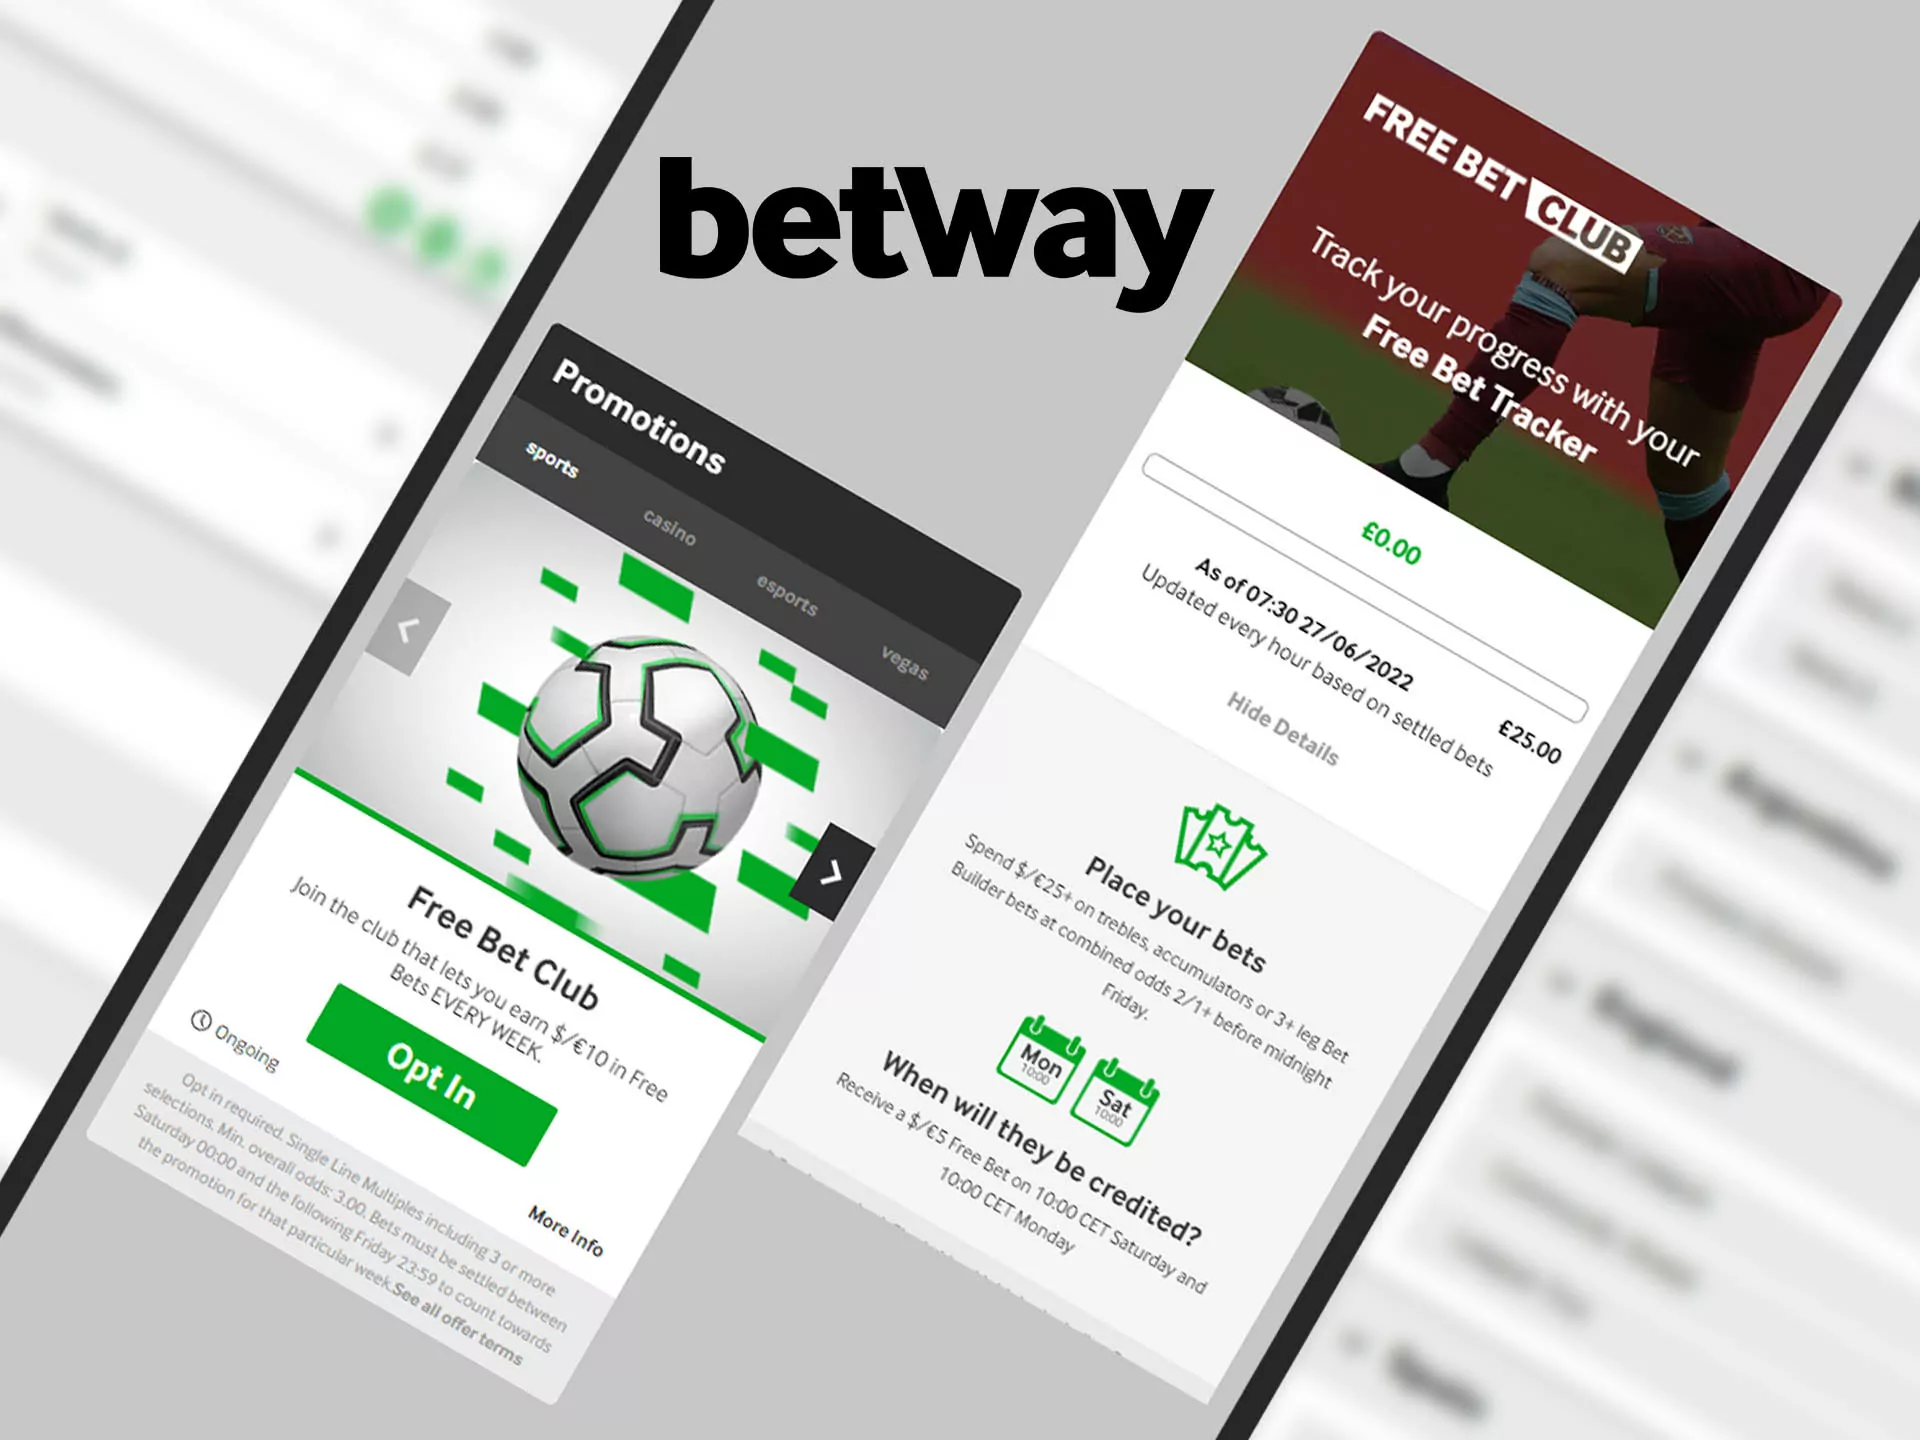 Bet every day and get additional bets at Betway.